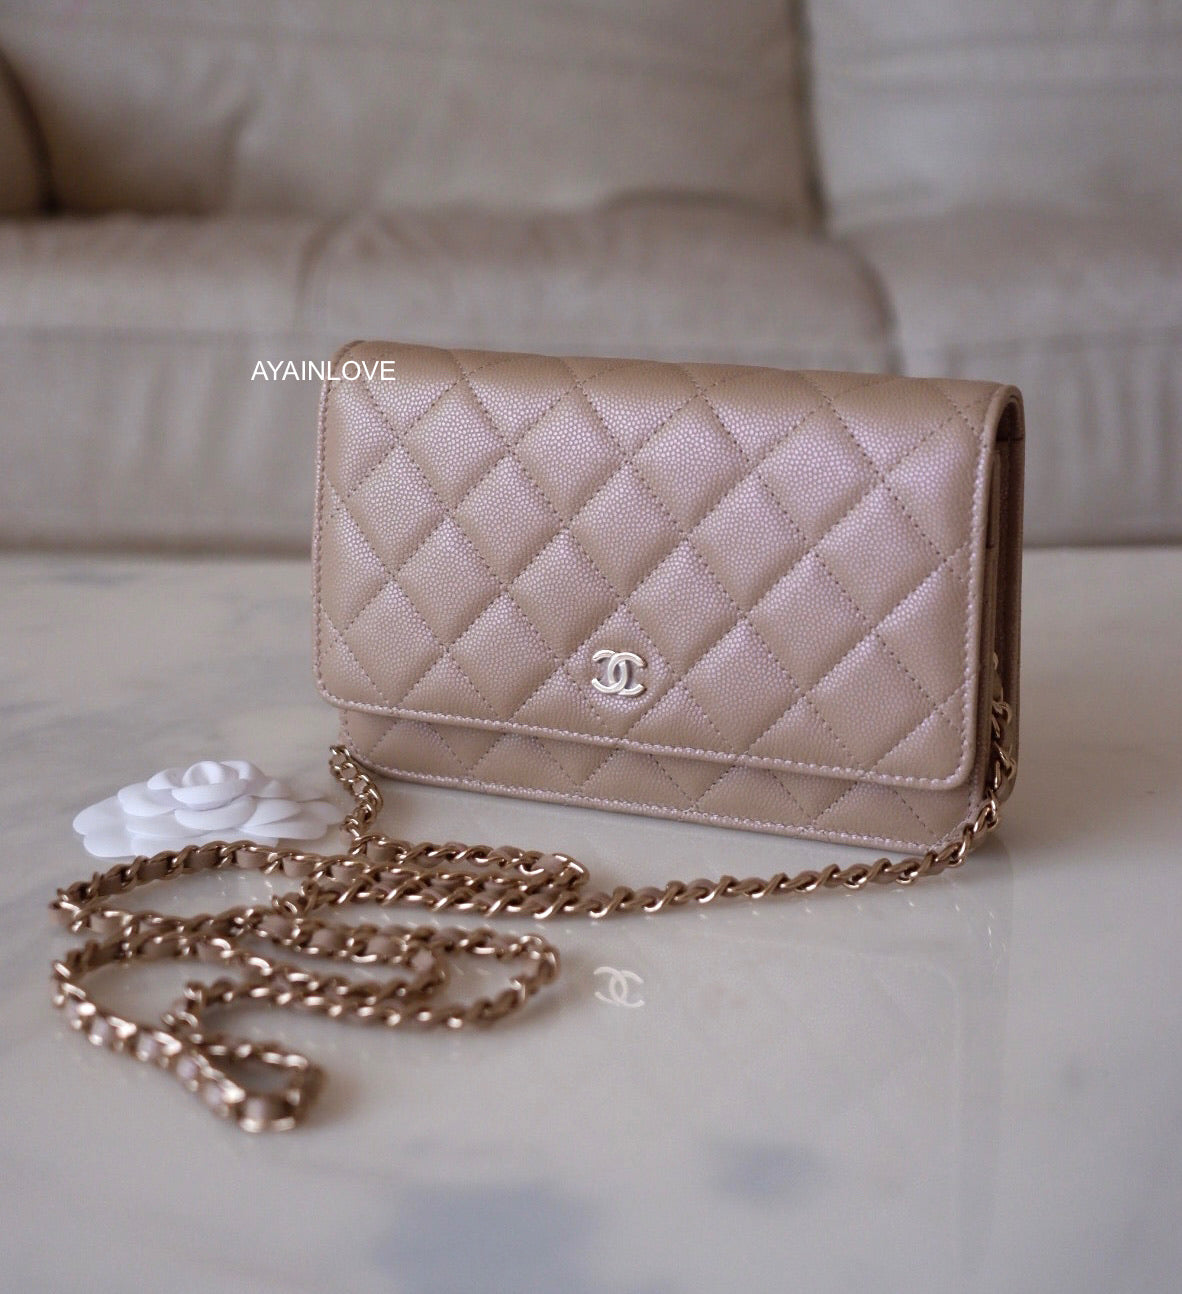 iridescent chanel wallet on